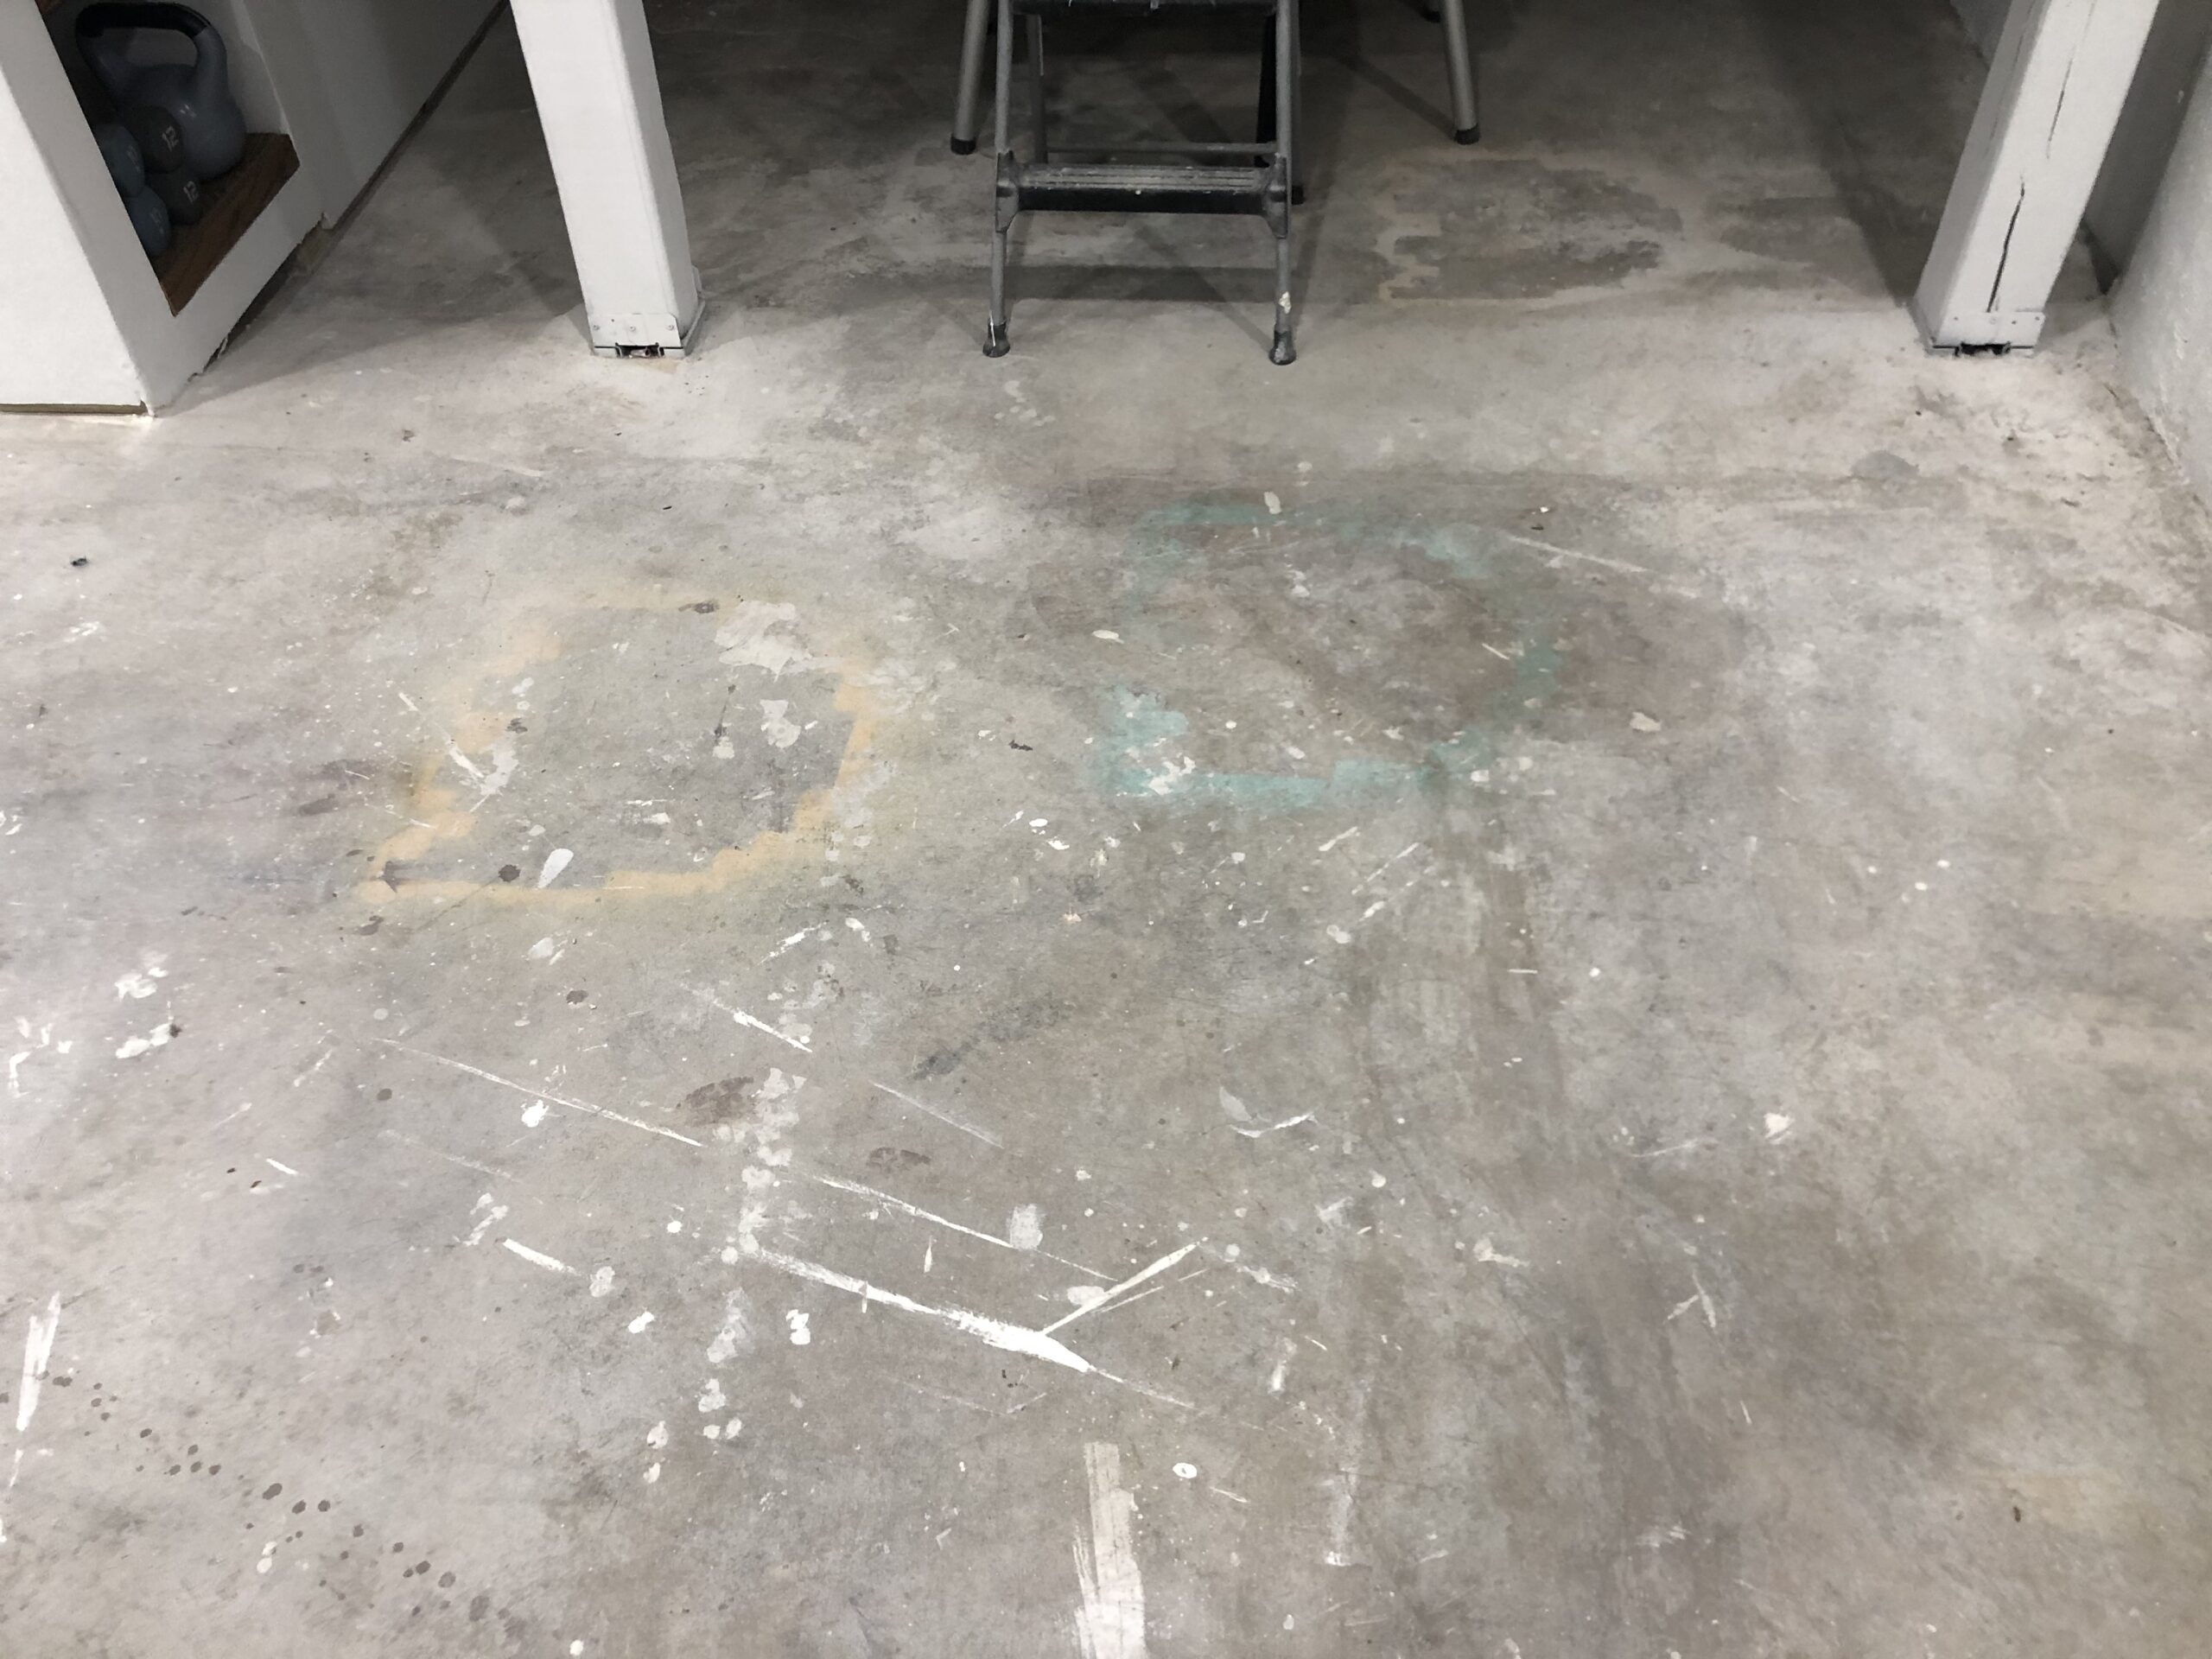 Basement floor with old stains spray paint and overspray on it scaled